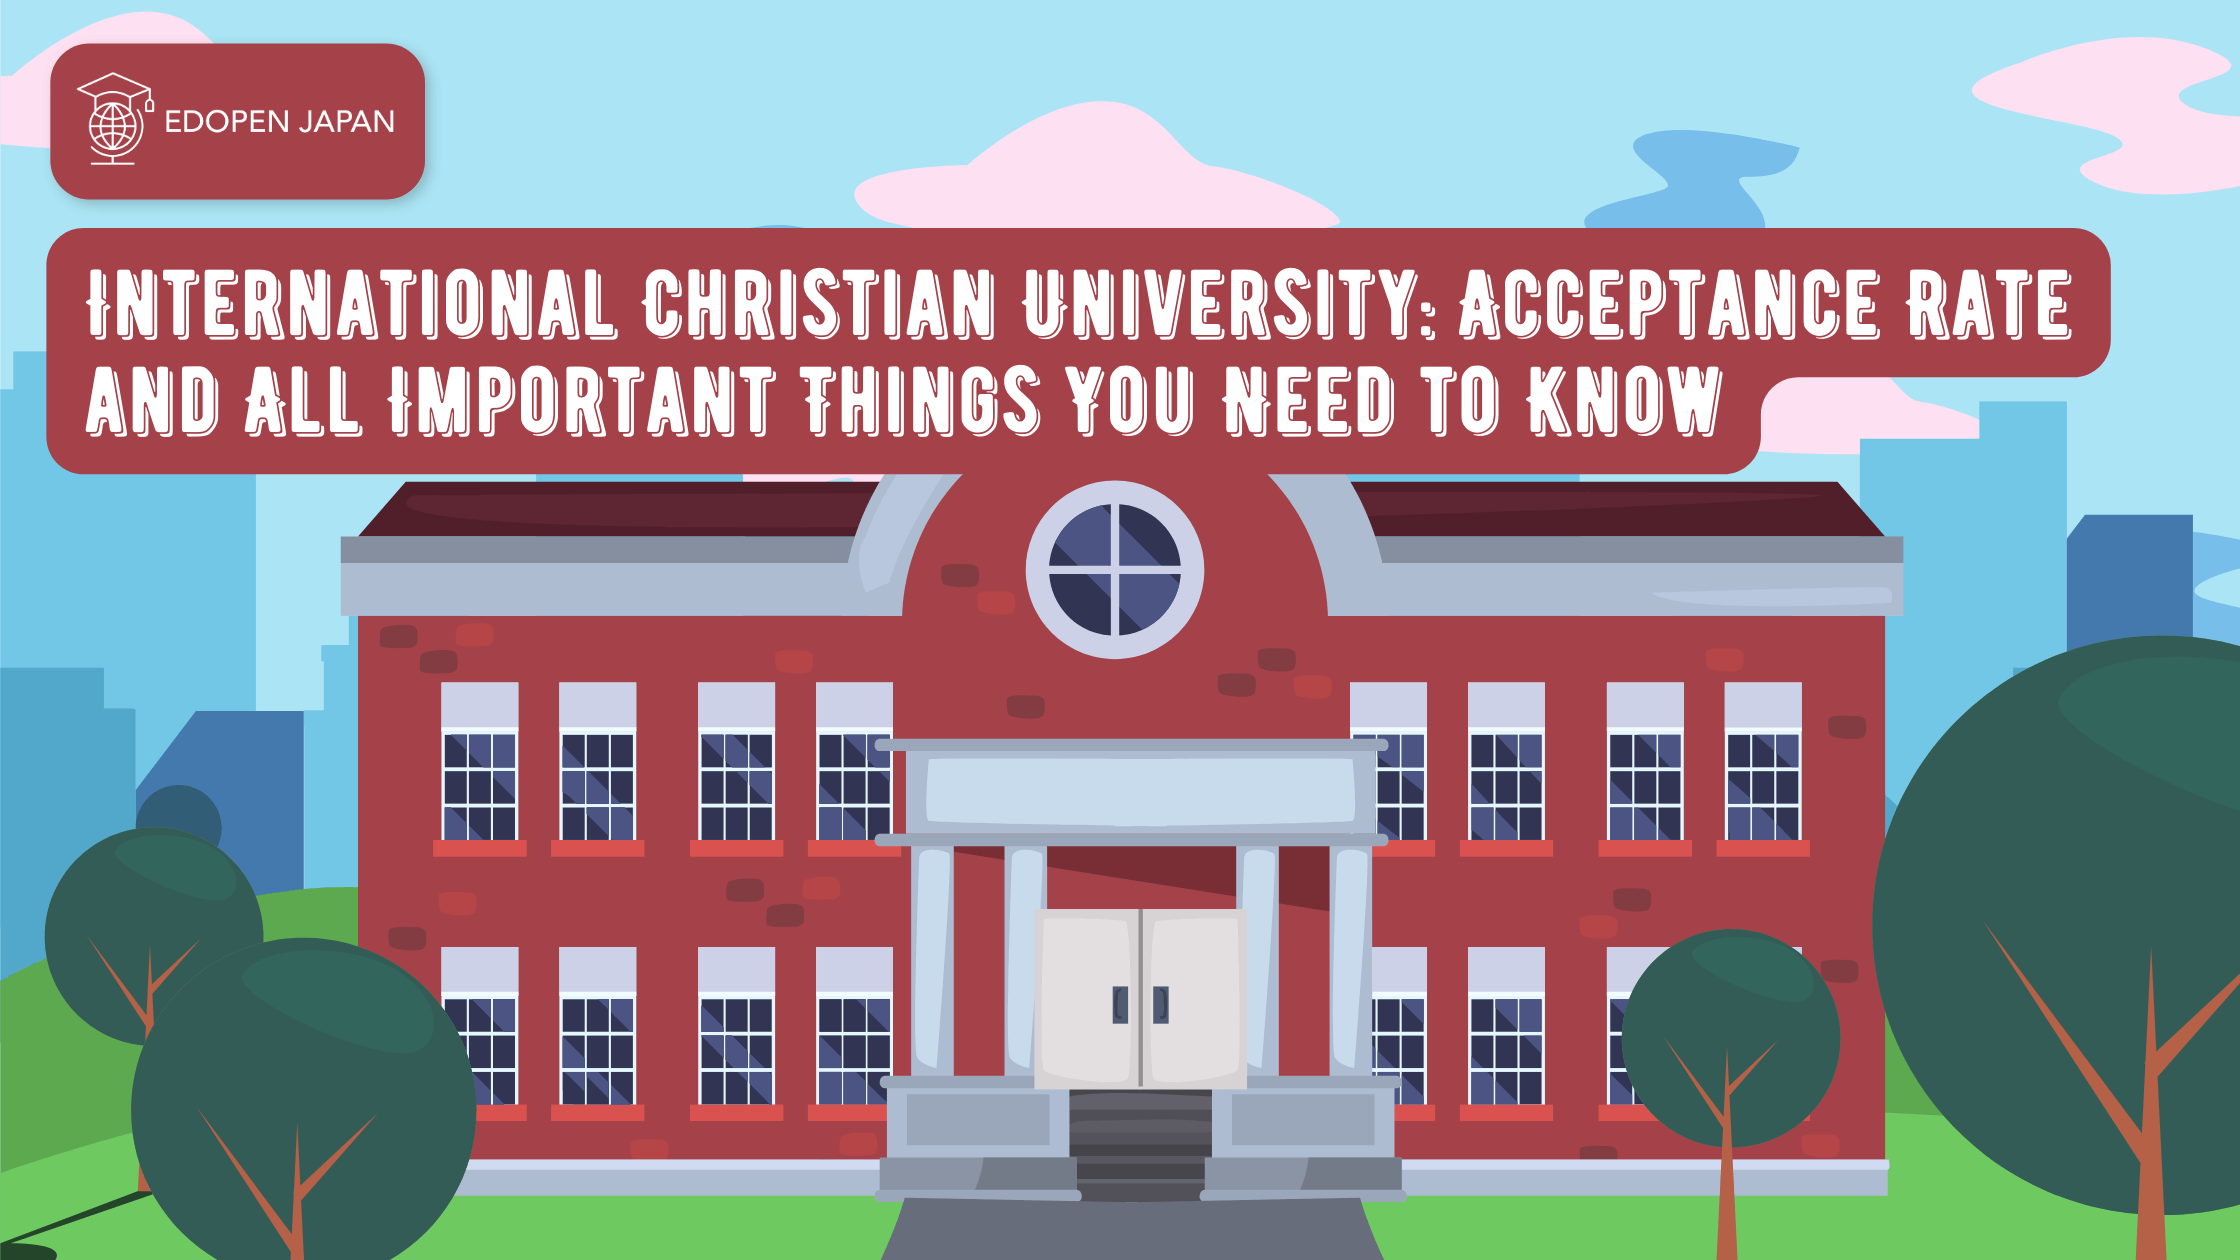 International Christian University: Acceptance Rate and All Important Things You Need to Know - EDOPEN Japan